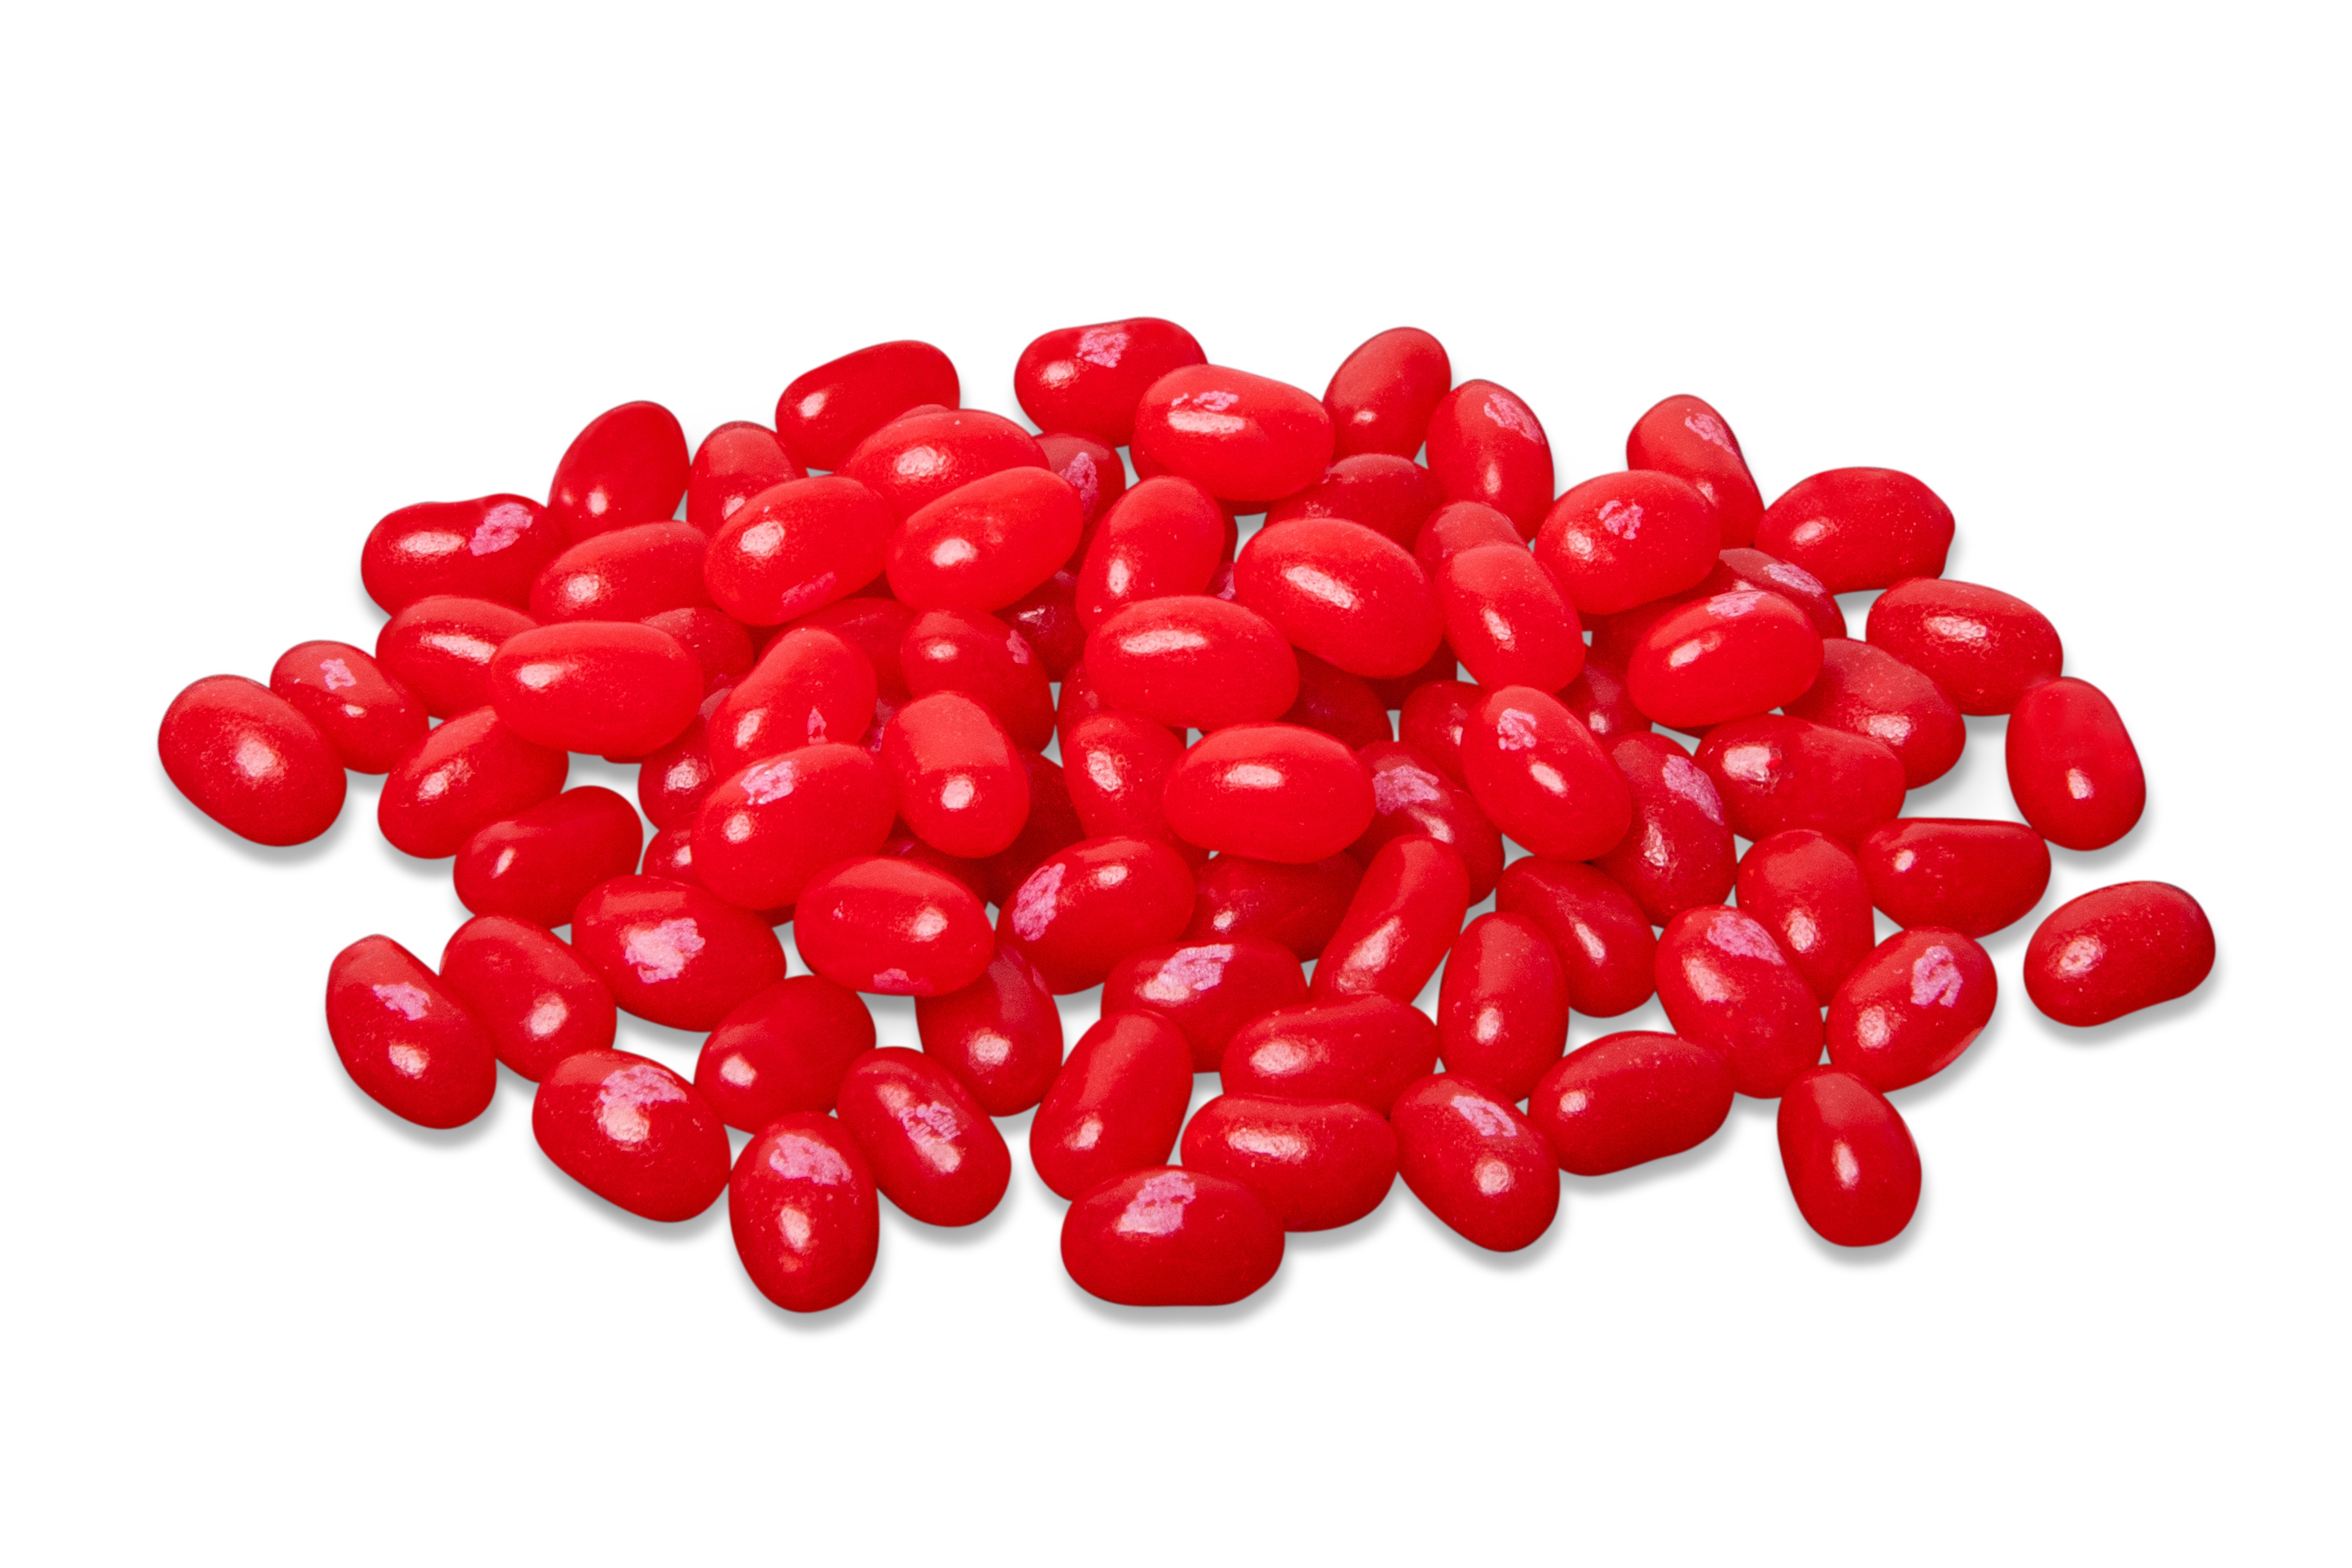 red jelly bean